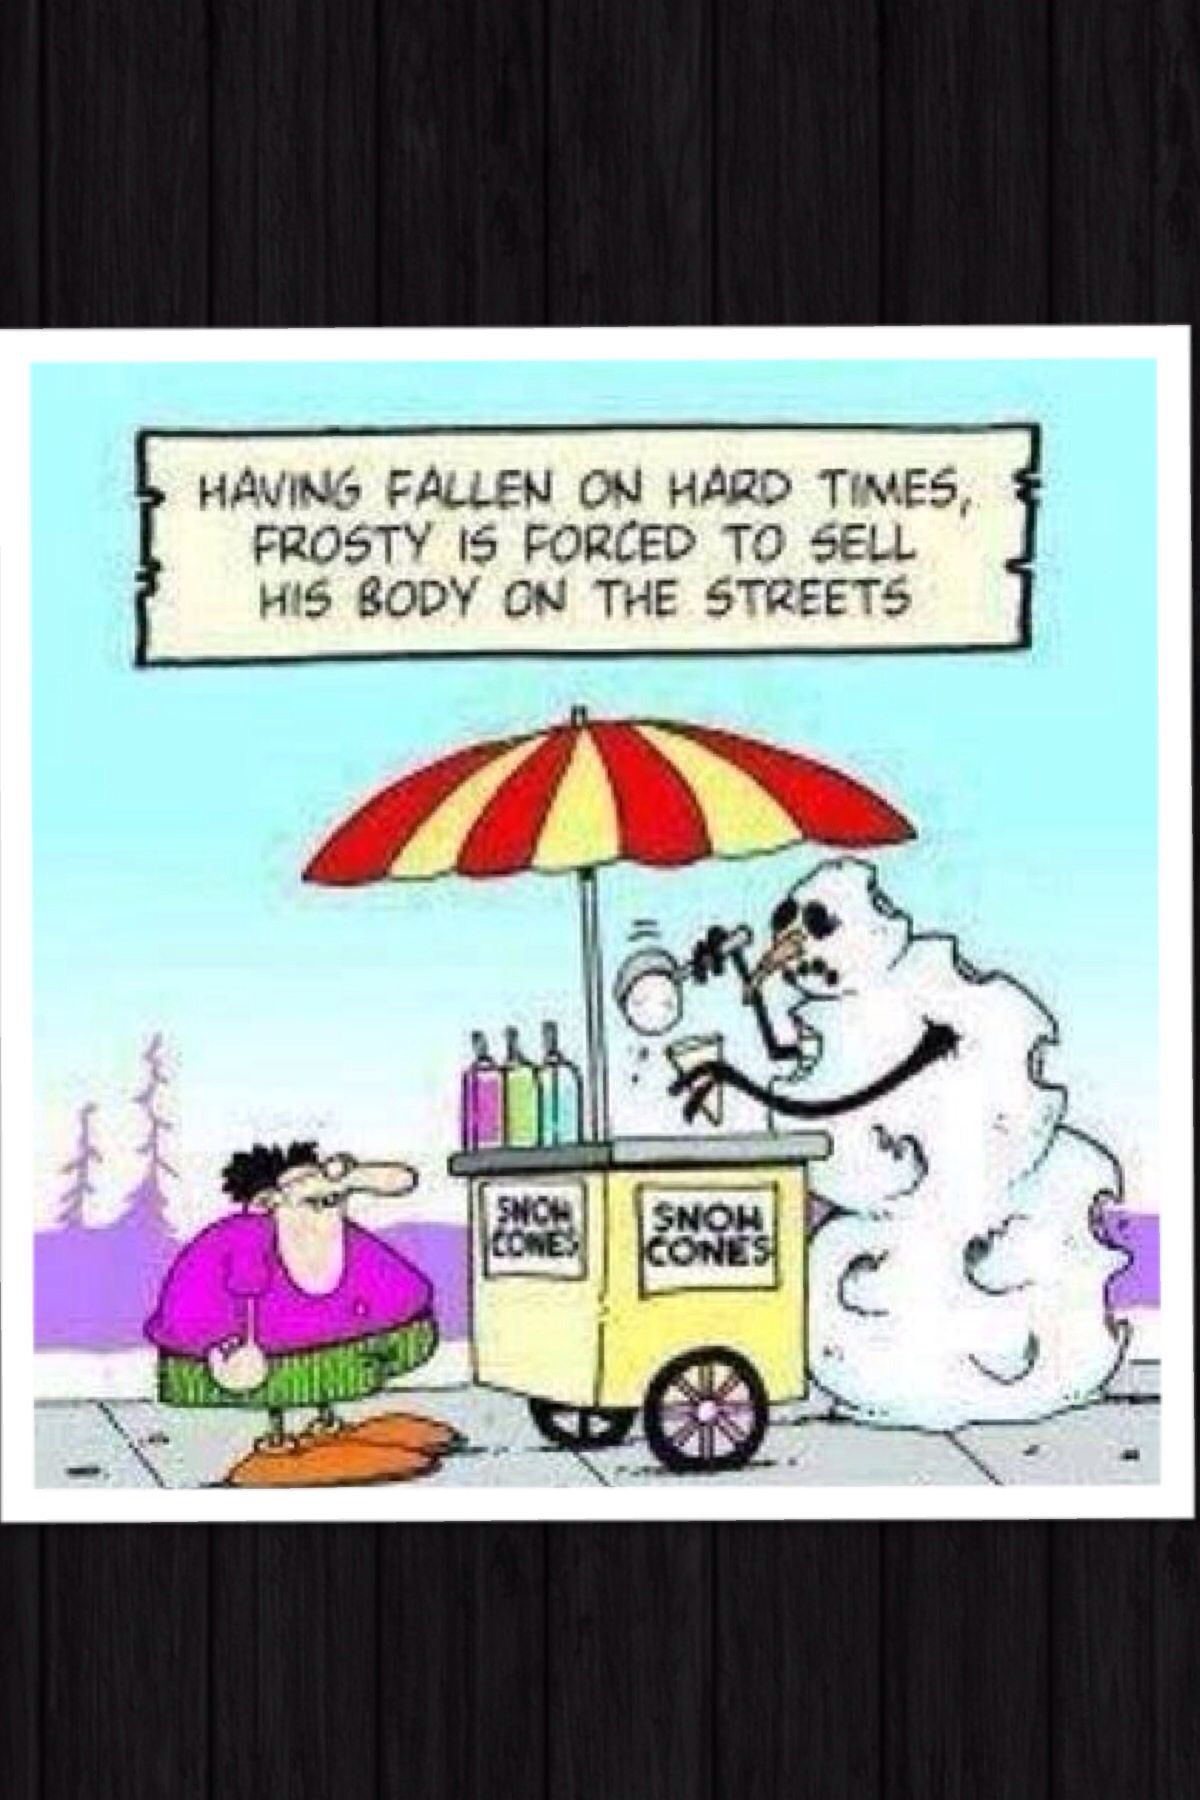 Lol! Poor frosty! | Things to make you laugh | Pinterest | Humor ...